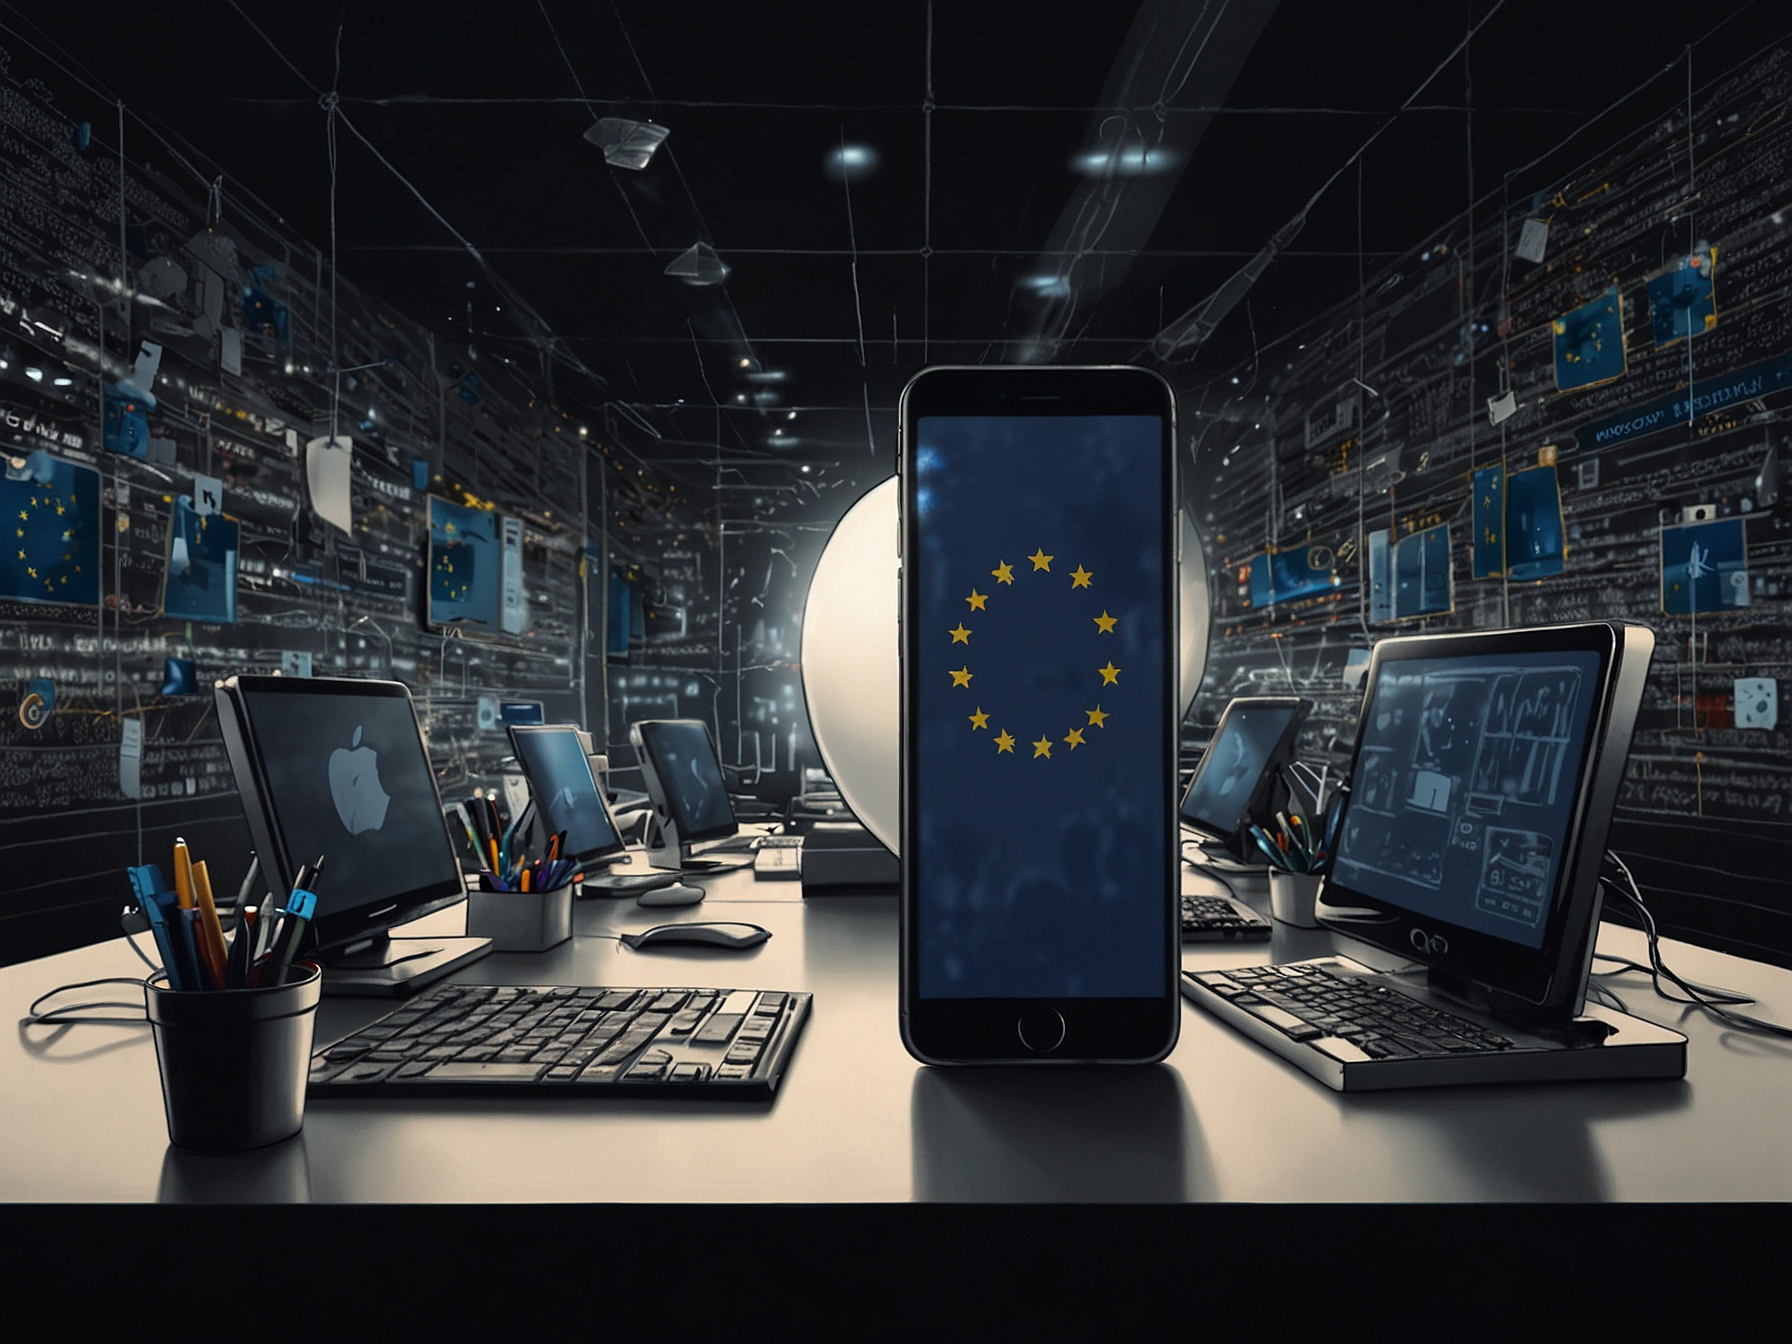 A graphic highlighting the EU's stringent tech regulations with Apple products in the background, symbolizing the challenges faced by the company in complying with new laws.